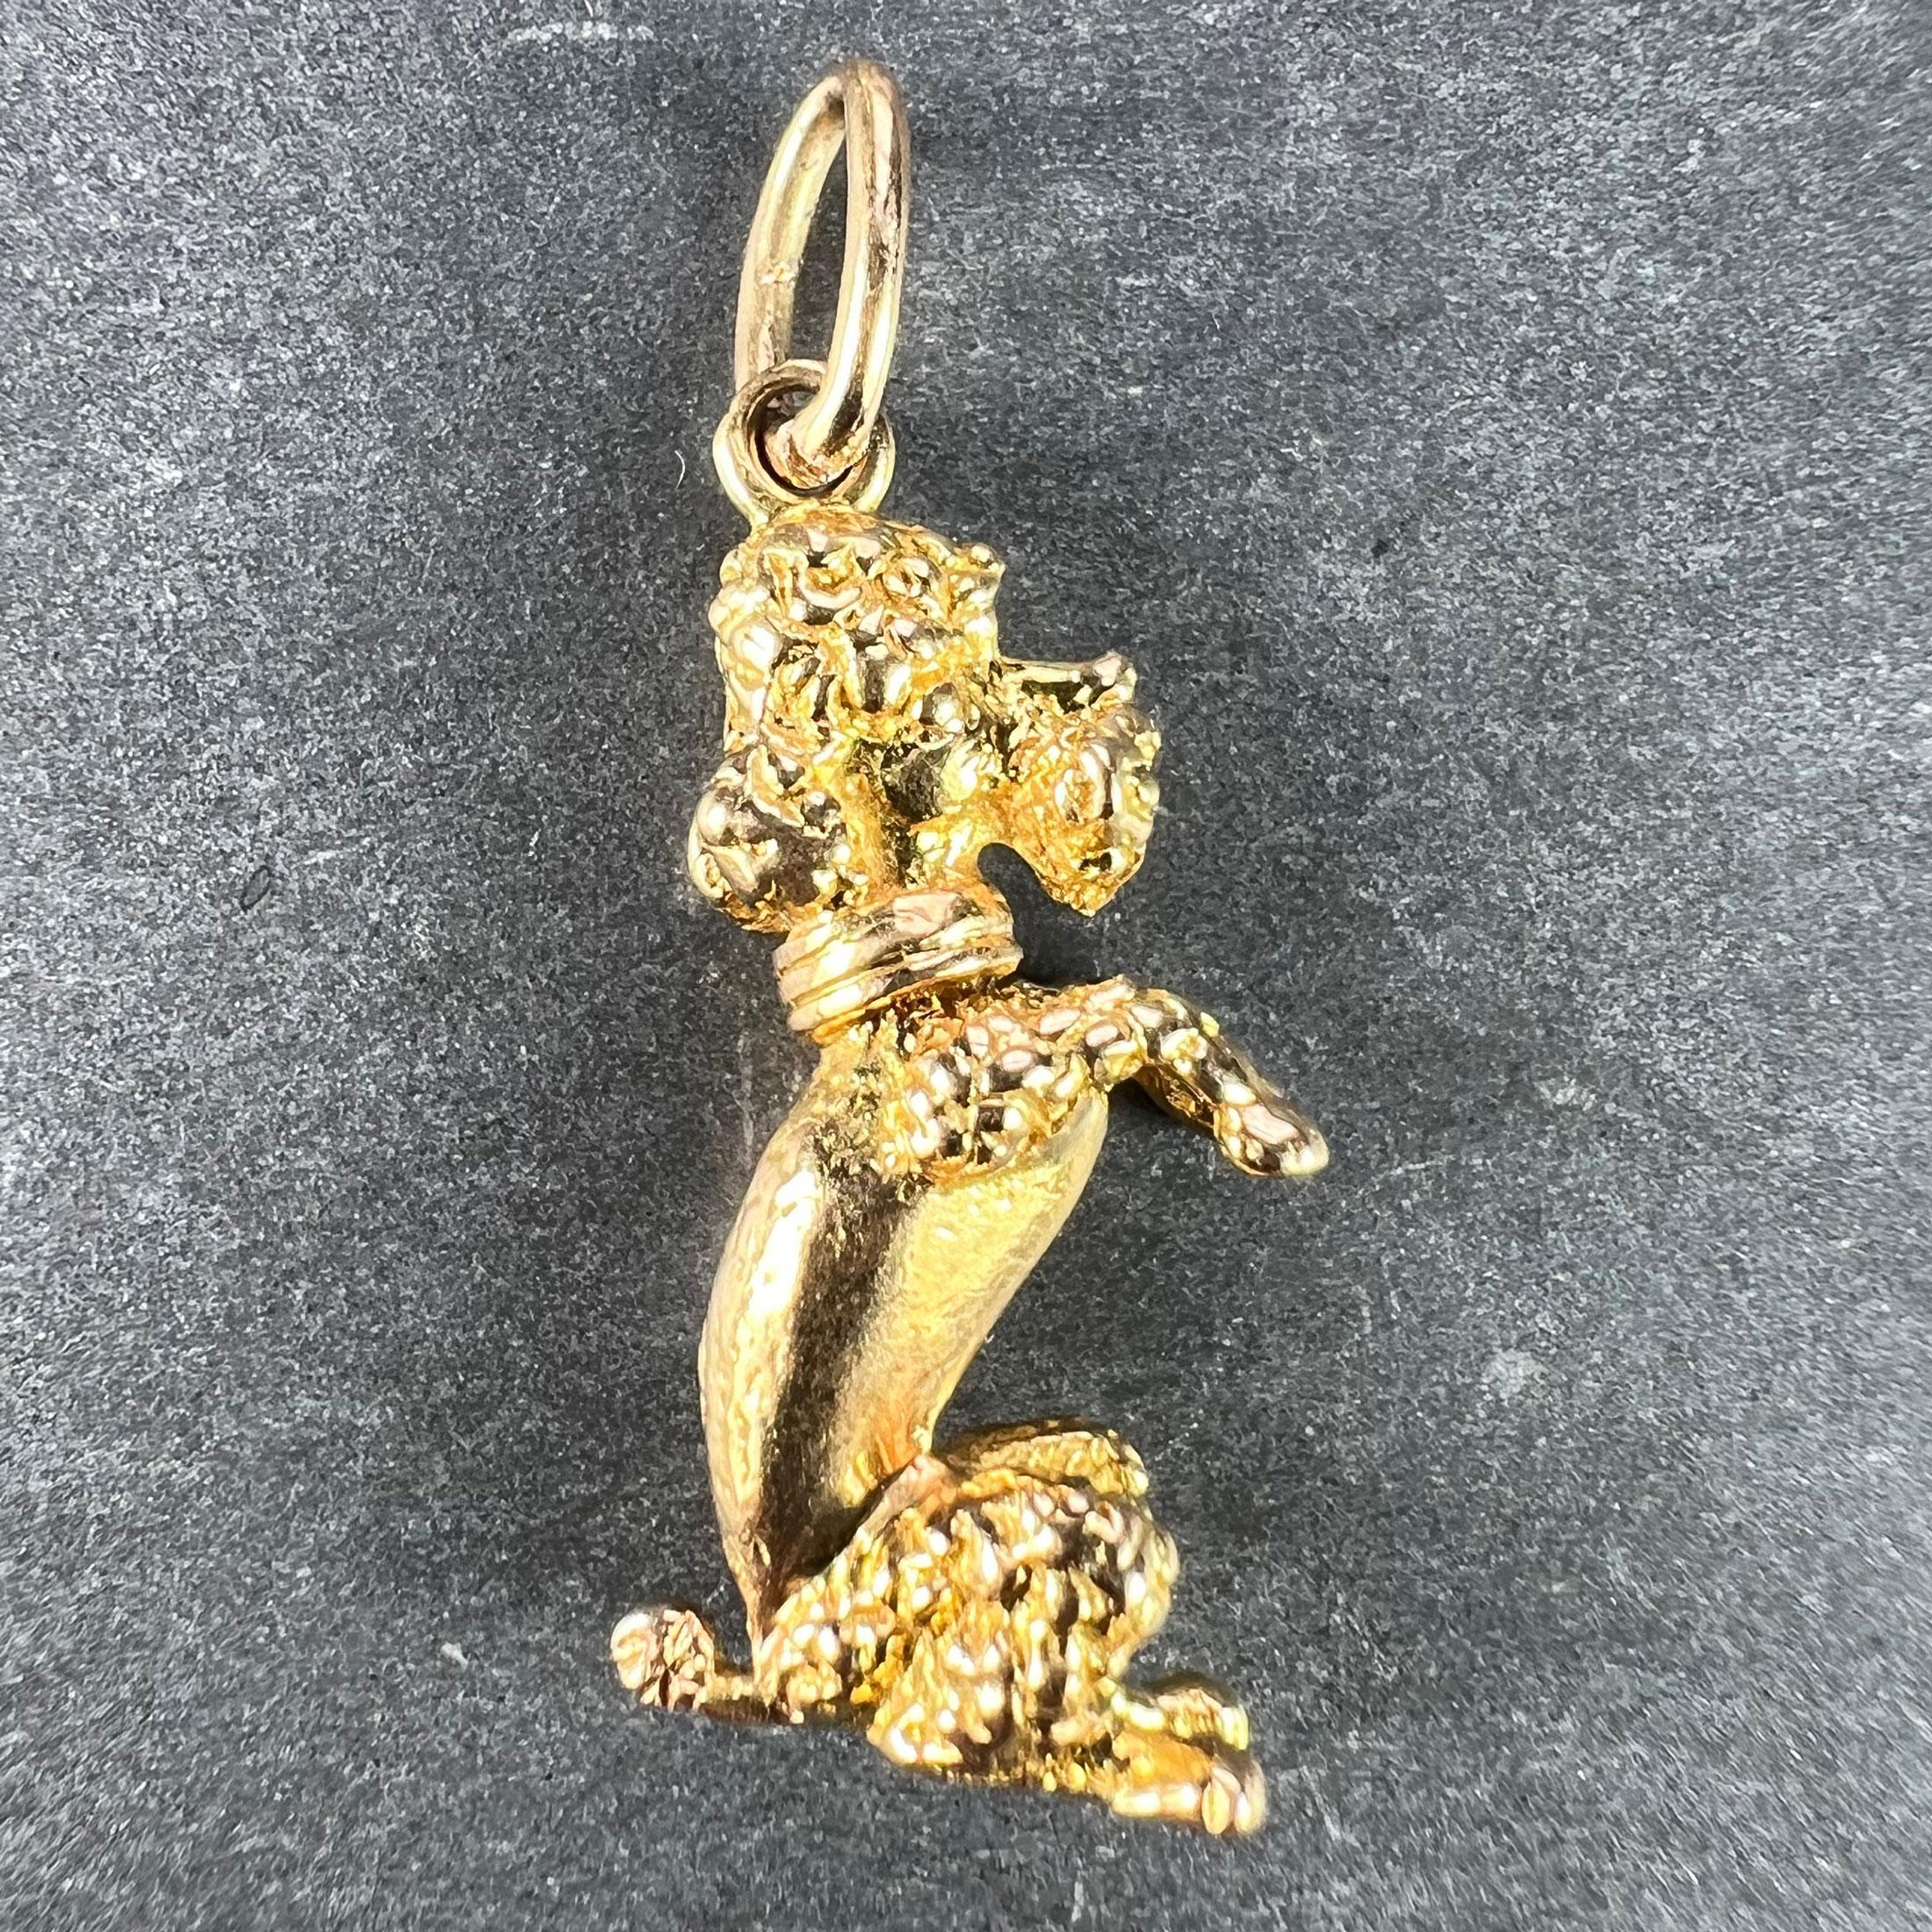 An 18 karat (18K) yellow gold charm pendant designed as a poodle dog sitting up on its haunches. Unmarked but tested for 18 karat gold.

Dimensions: 2.3 x 1 x 0.55 cm (not including jump ring)
Weight: 4.2 grams 
(Chain not included) 